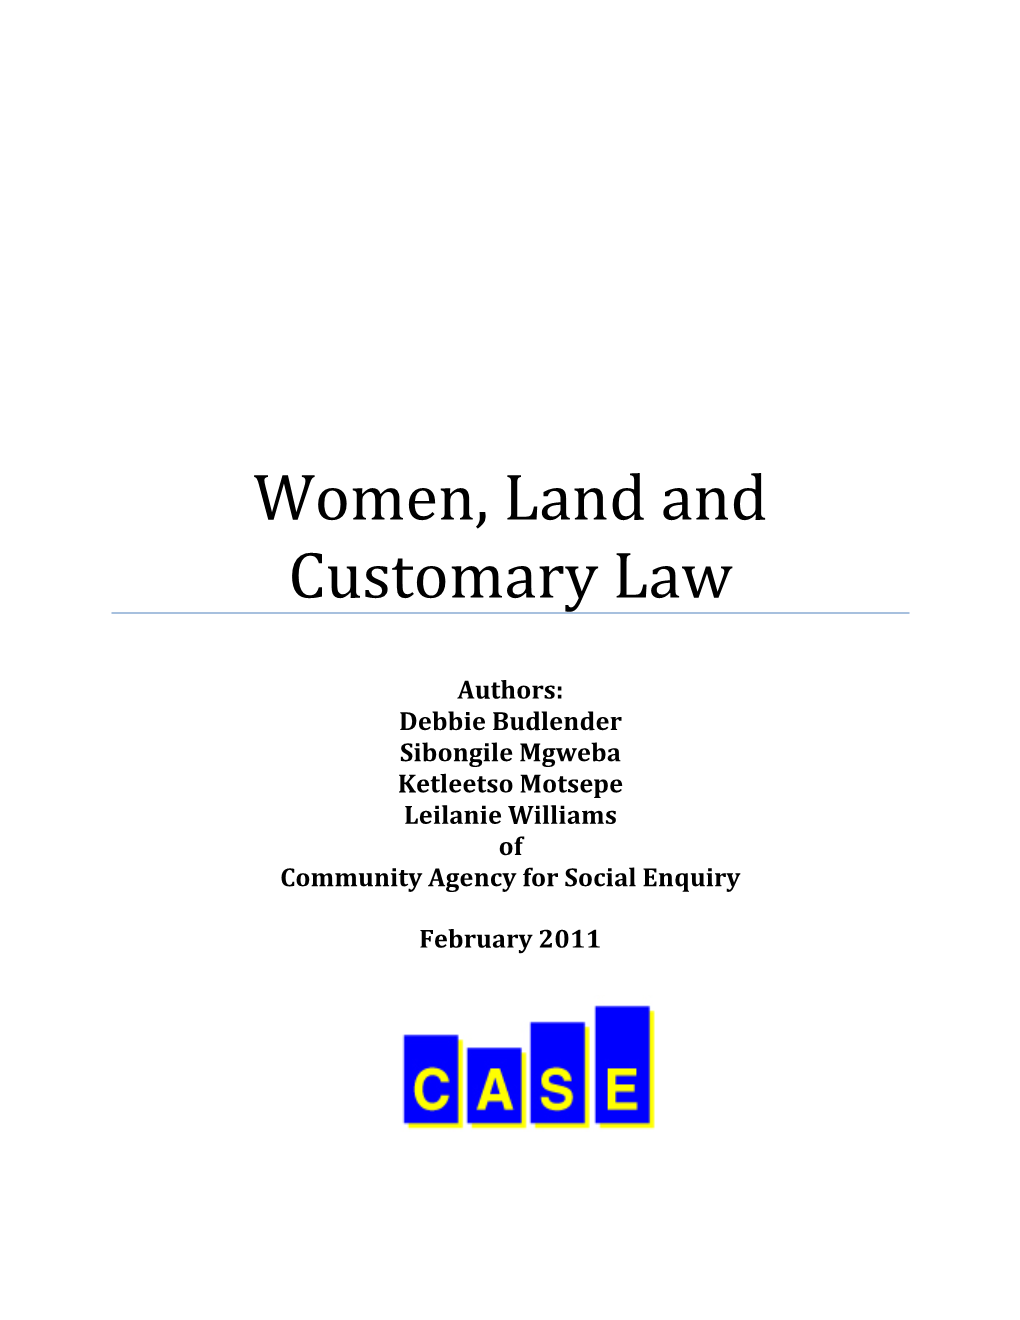 Women, Land and Customary Law